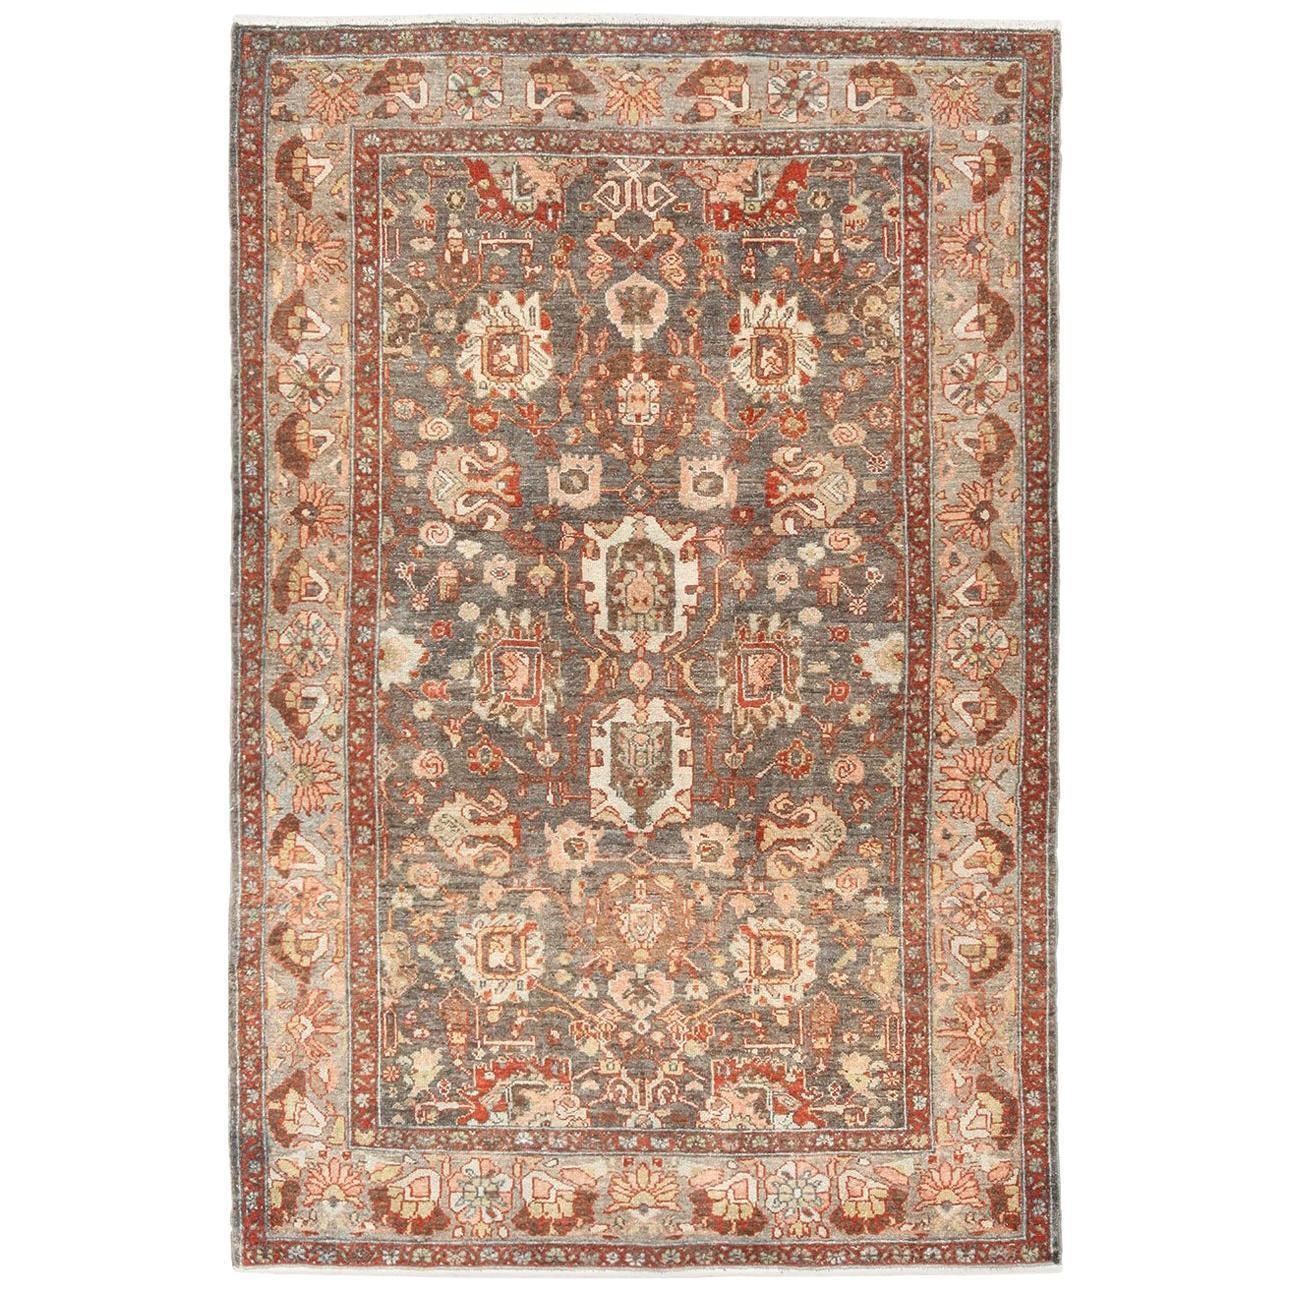 Antique Malayer Persian Rug. Size: 4 ft 4 in x 6 ft 5 in 